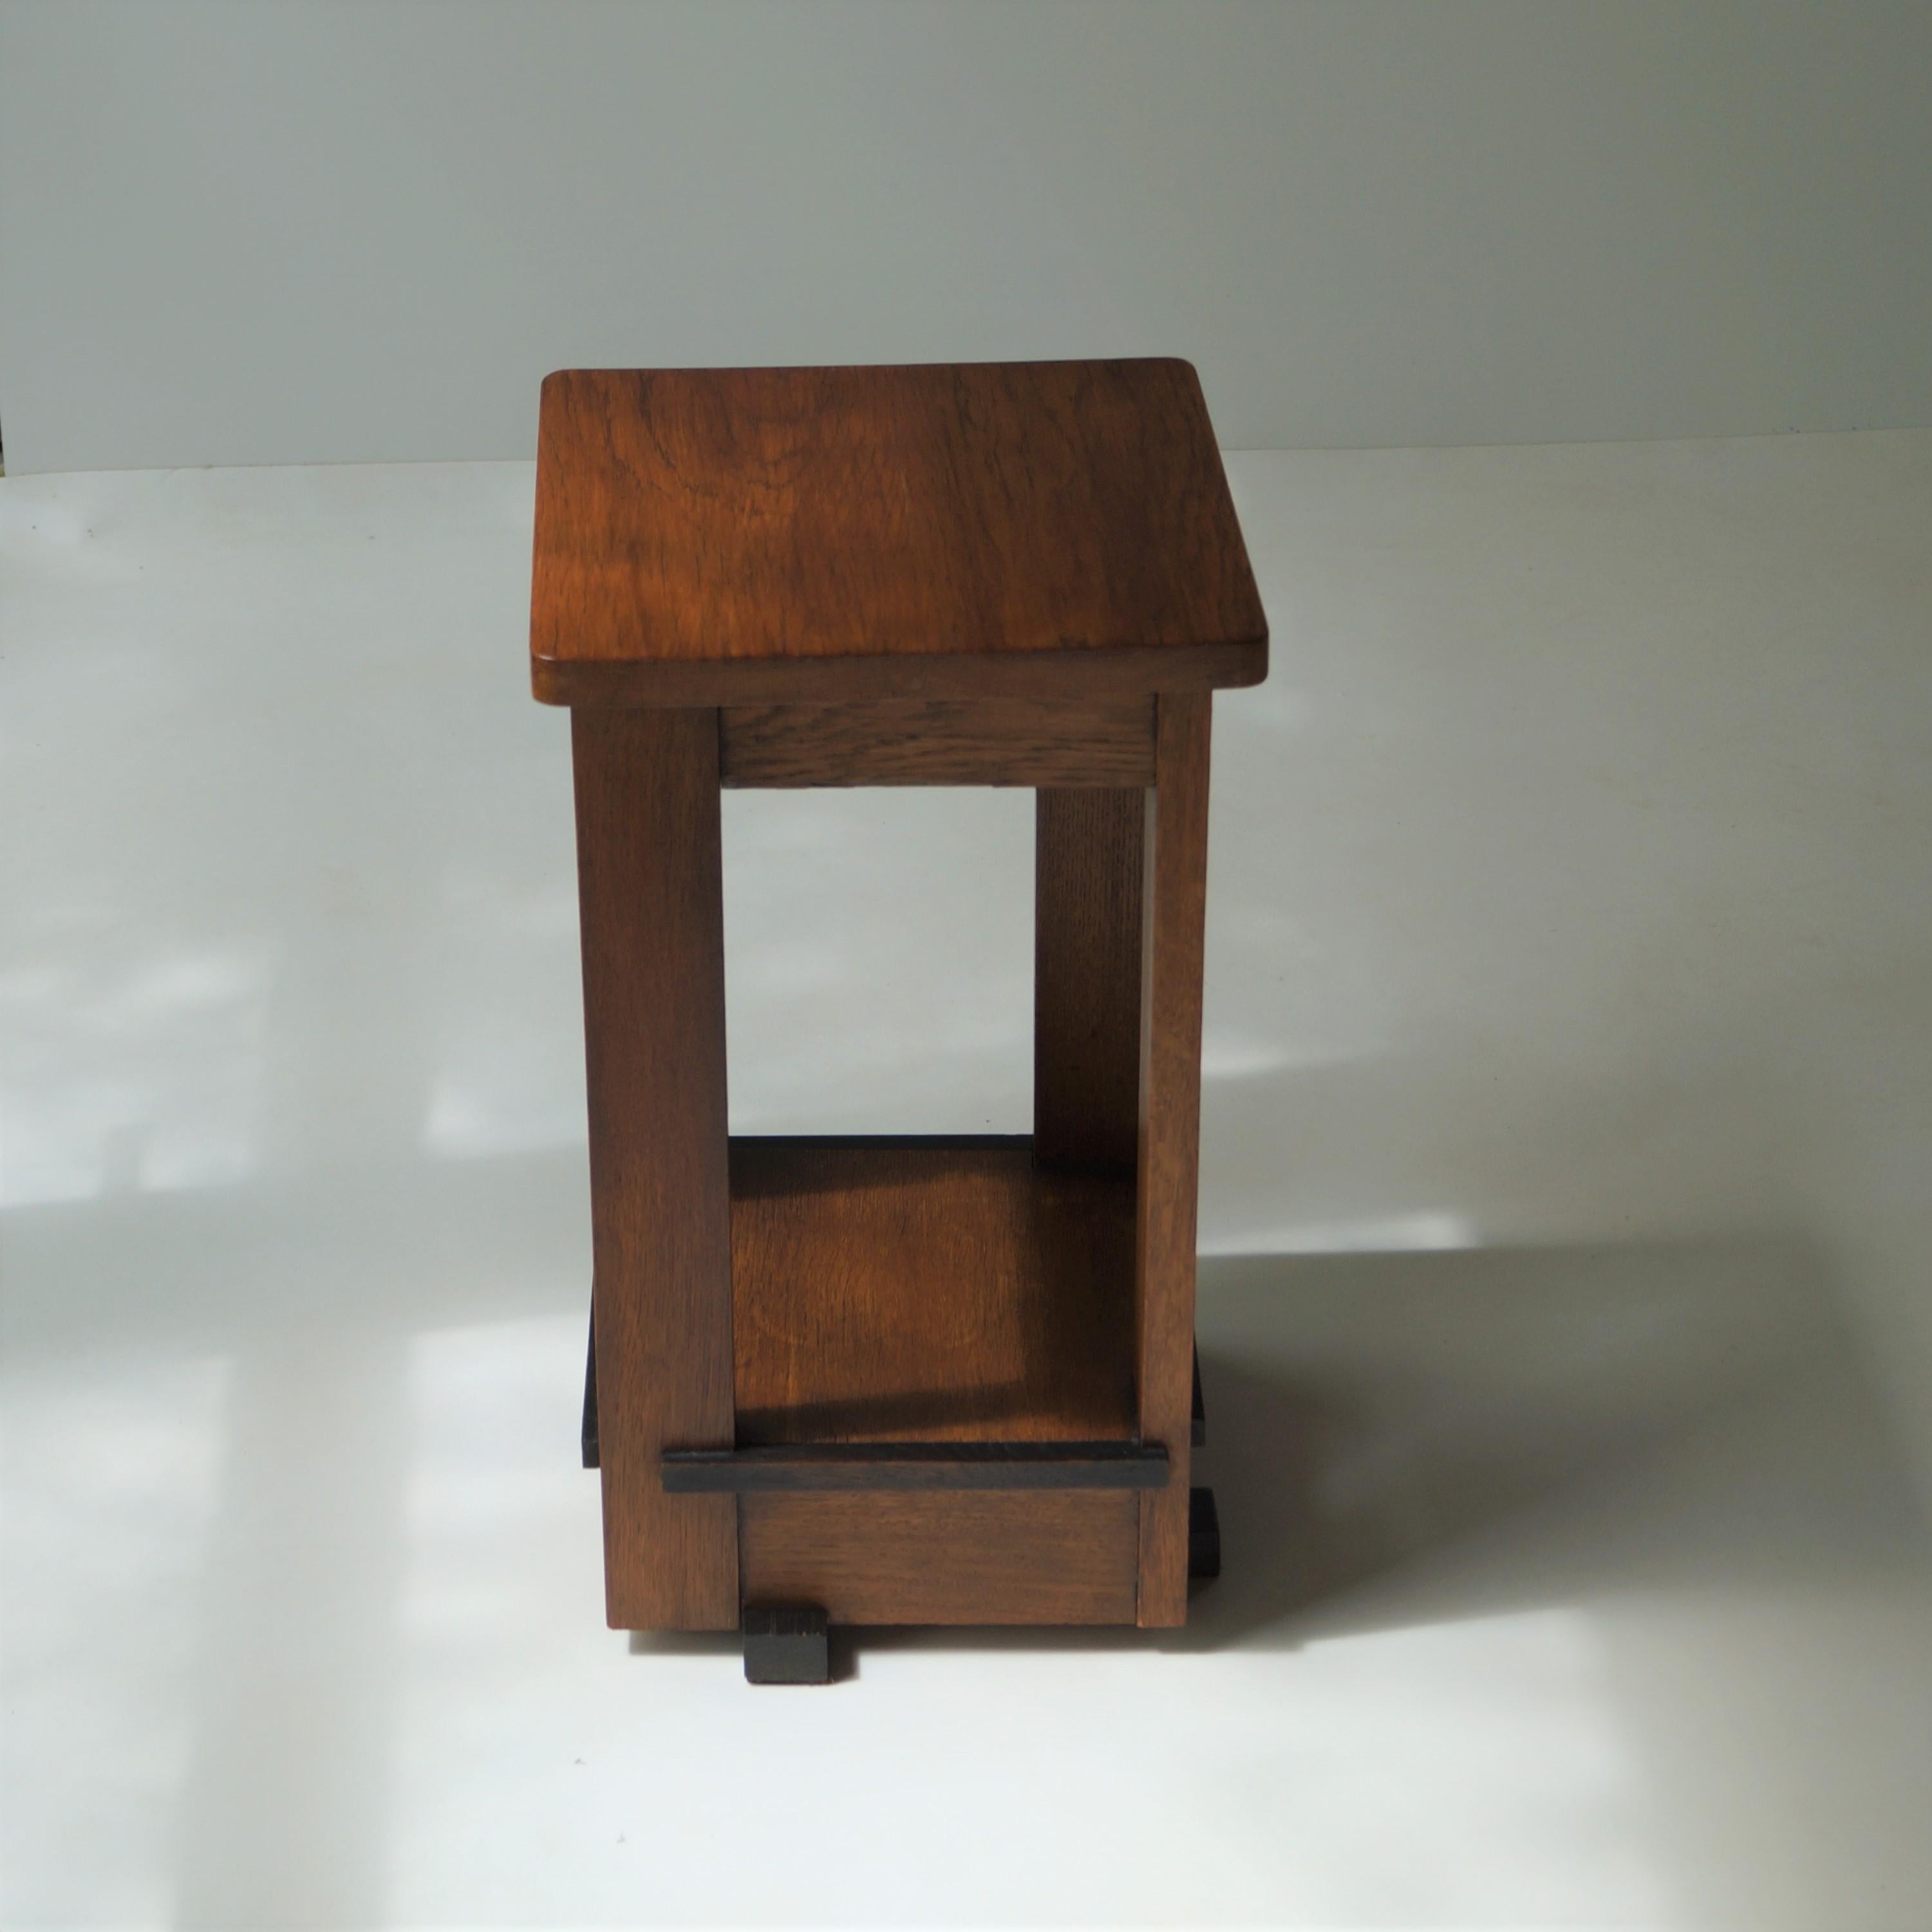 Dutch Art Deco Haagse School side table attributed to Jan Brunott, 1920s For Sale 11